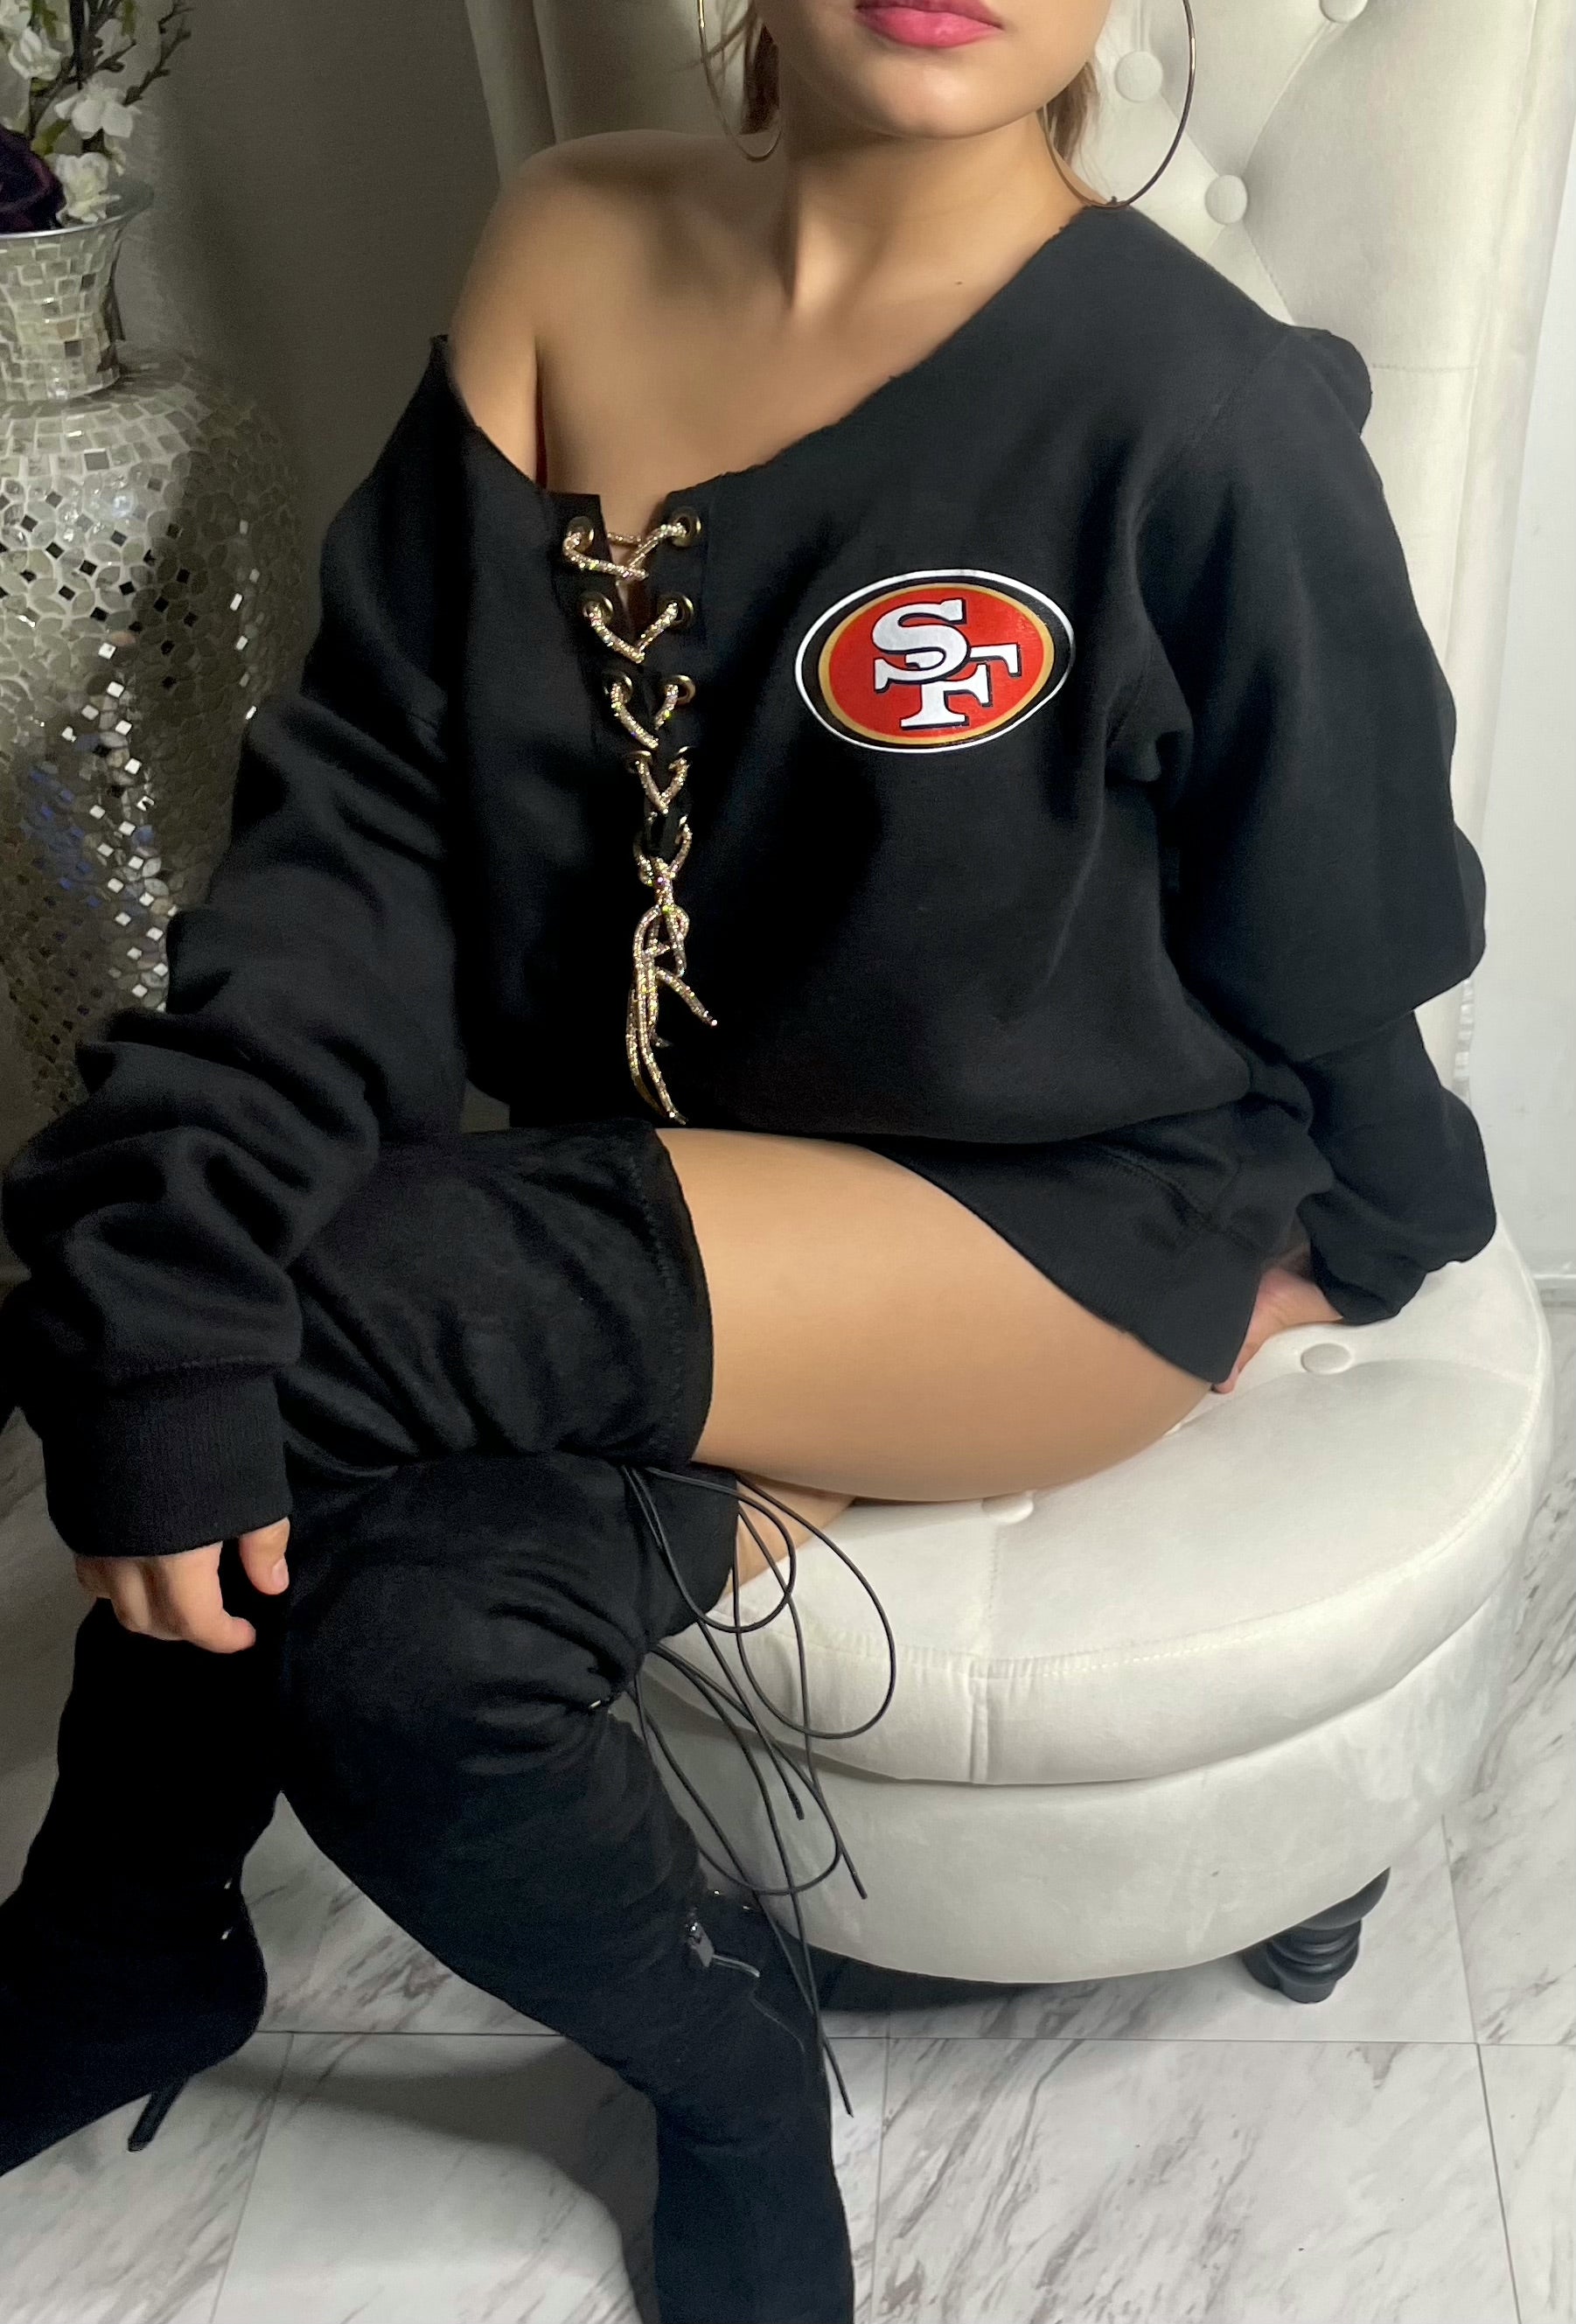 SF 49ers Oversized Sweater with a Grommet Cut & Rhinestone Cord